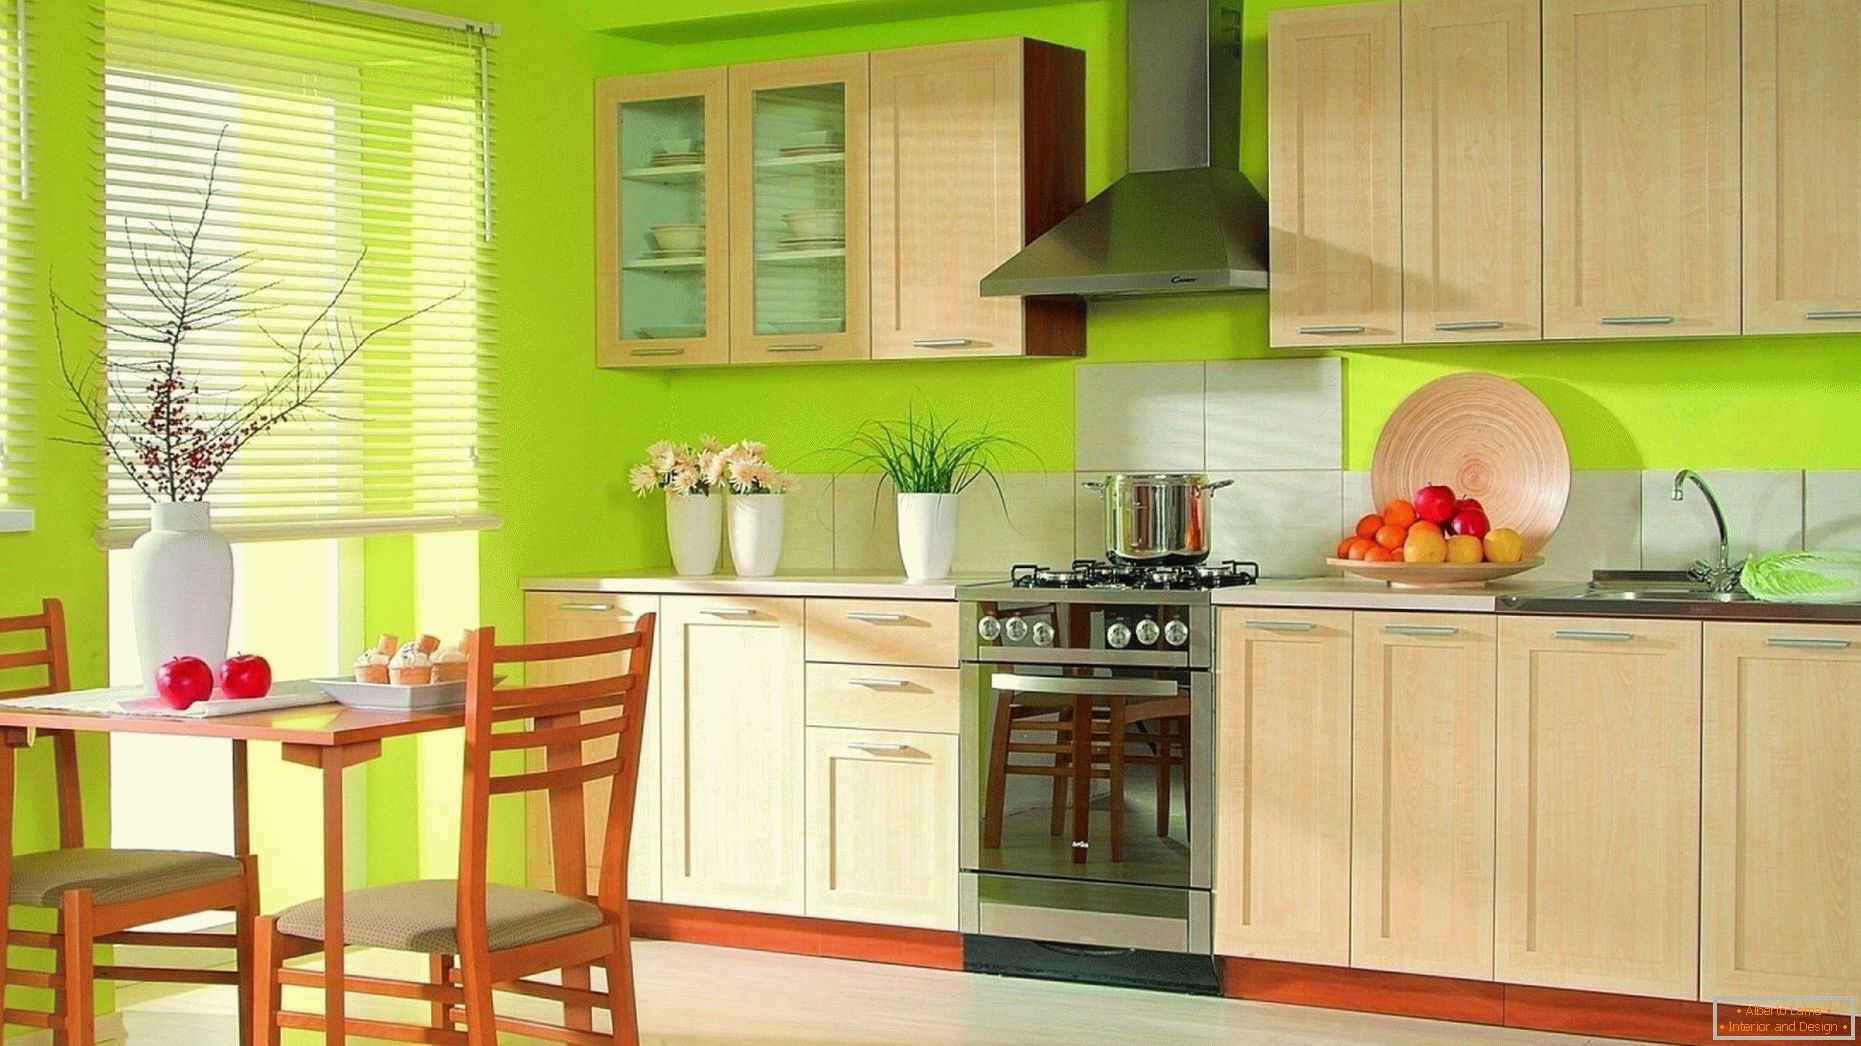 Kitchen design with contrasting colors